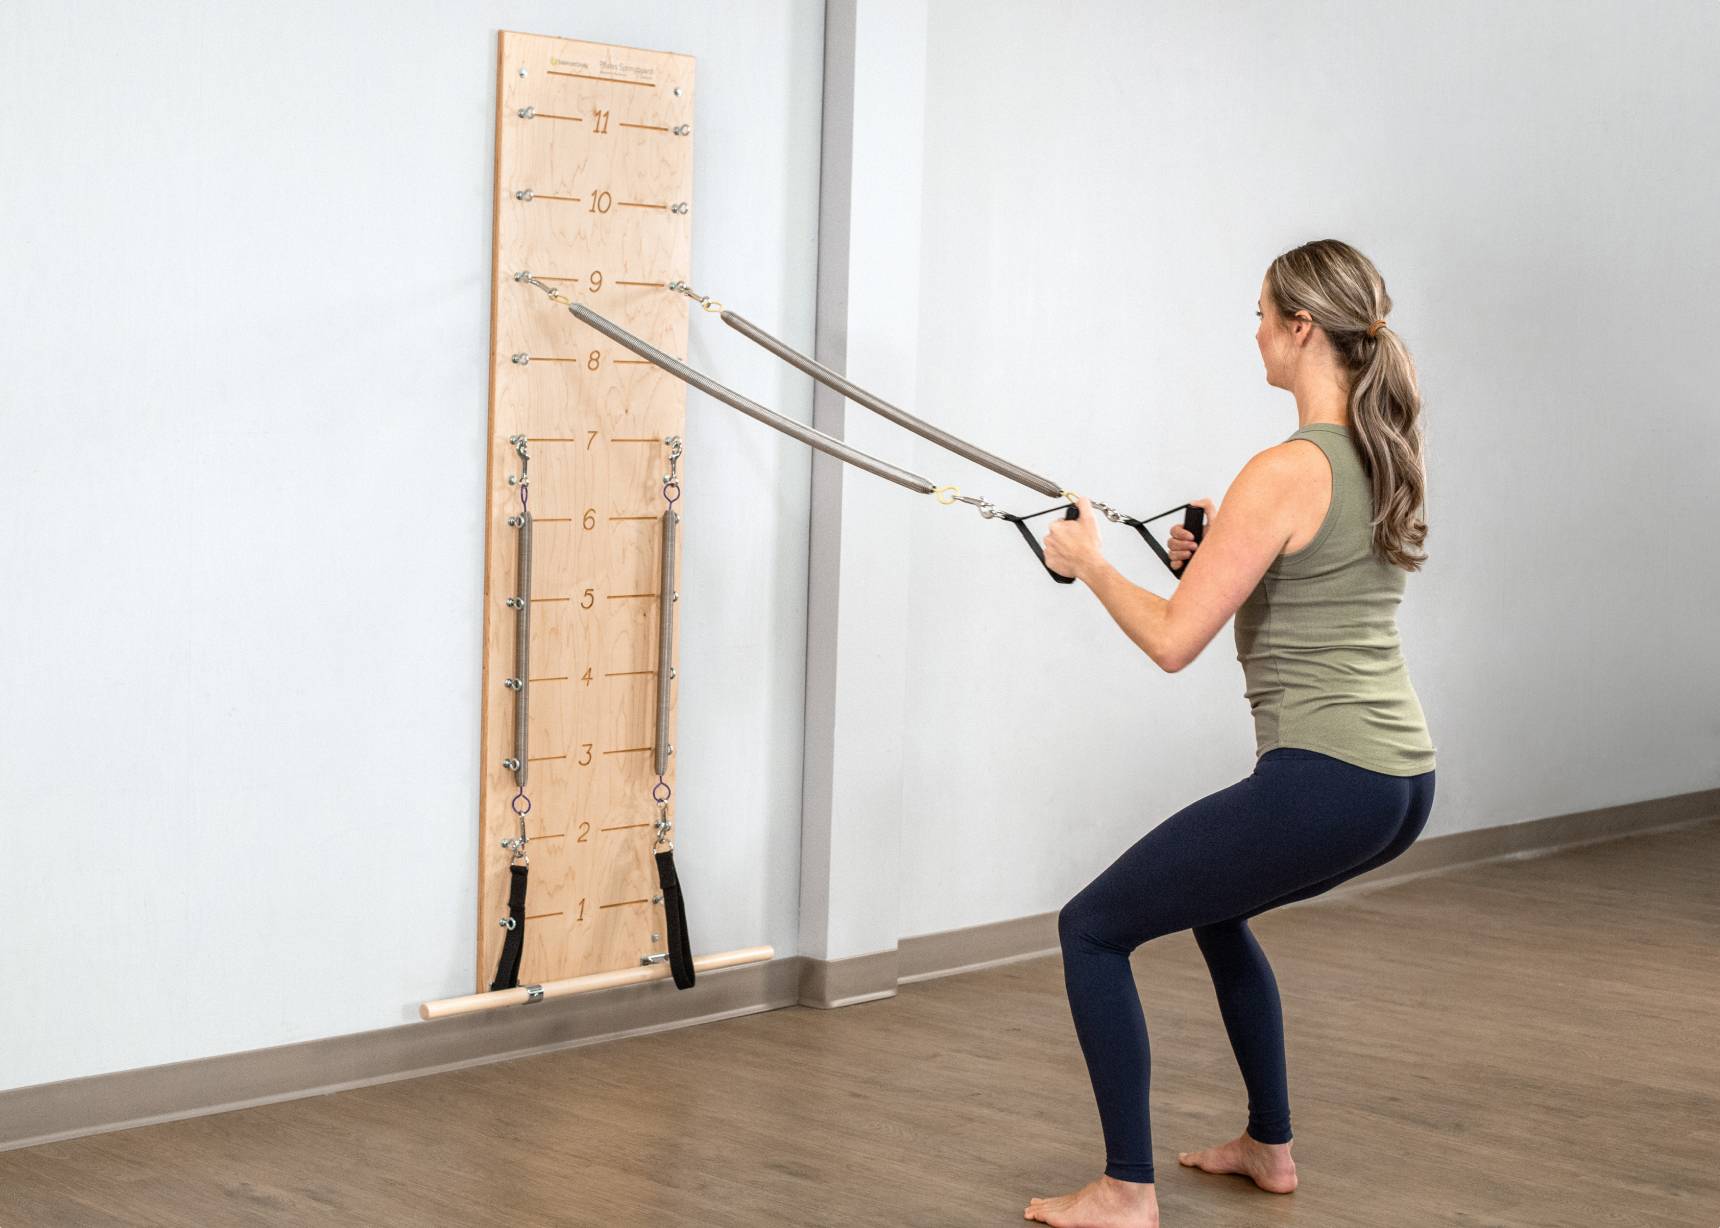 Woman pulling Pilates Springboard straps, which are affixed to a wall.